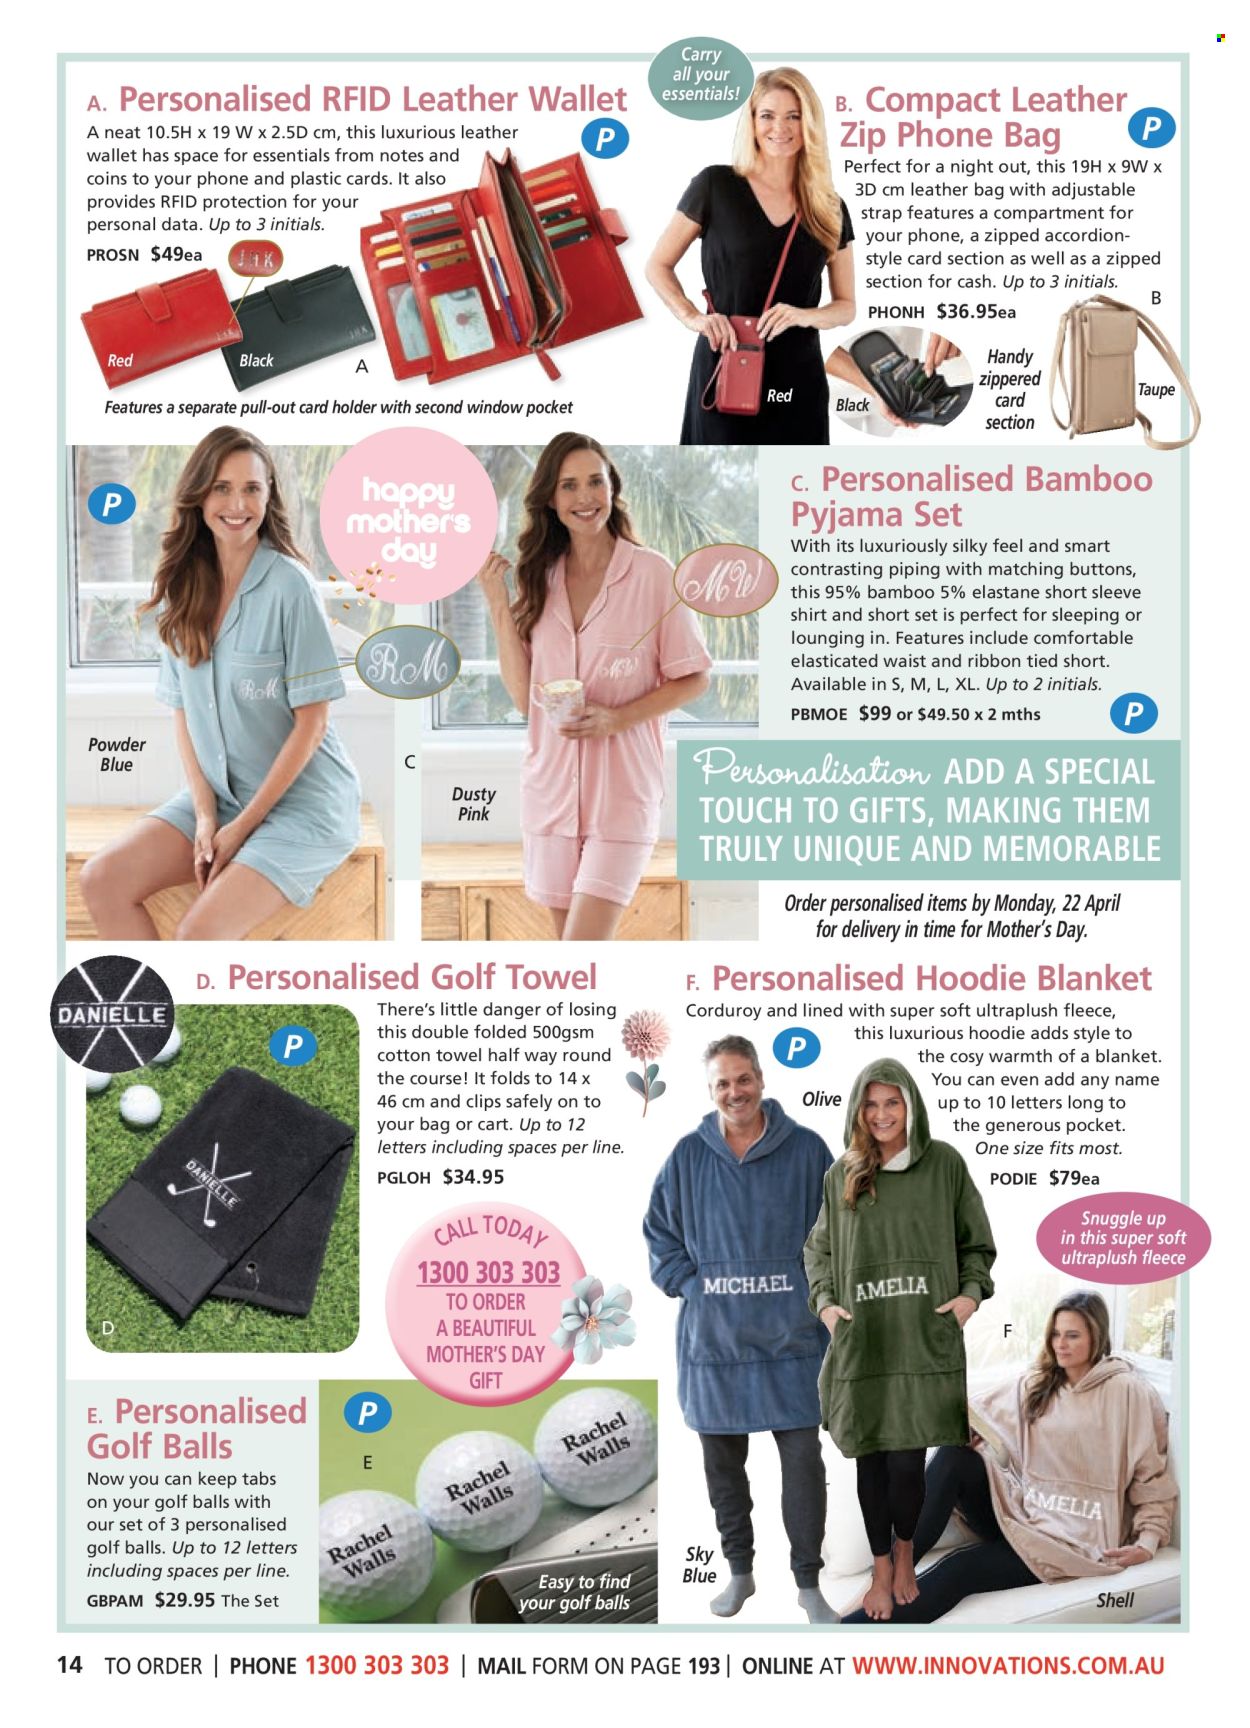 thumbnail - Innovations Catalogue - Sales products - ribbon, blanket, towel, hoodie, shirt, leather bag, leather wallet, pajamas. Page 14.